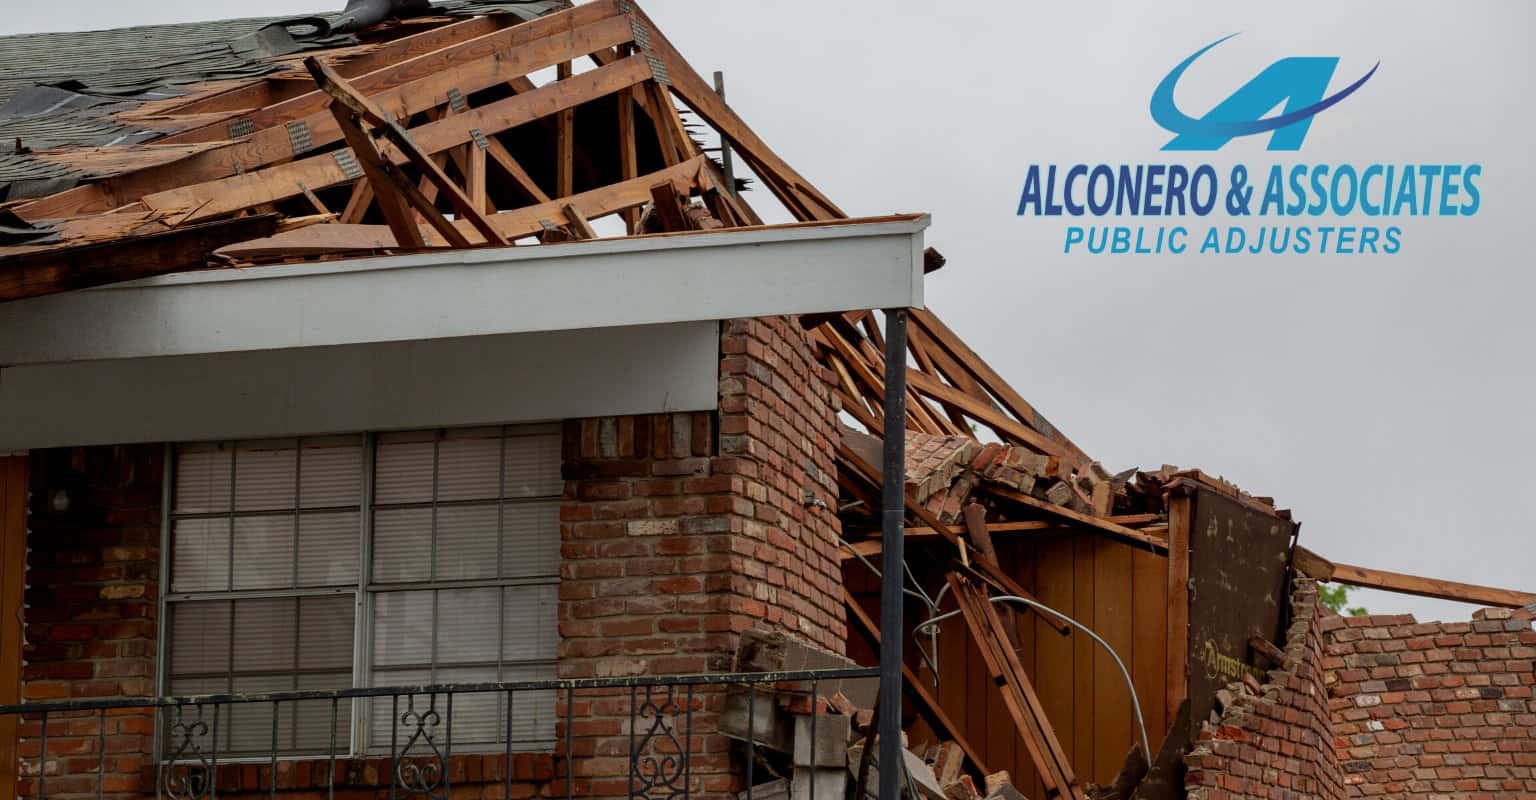 Alconero and Associates Public Adjusters Assisting with Property Damage Claim in Florida